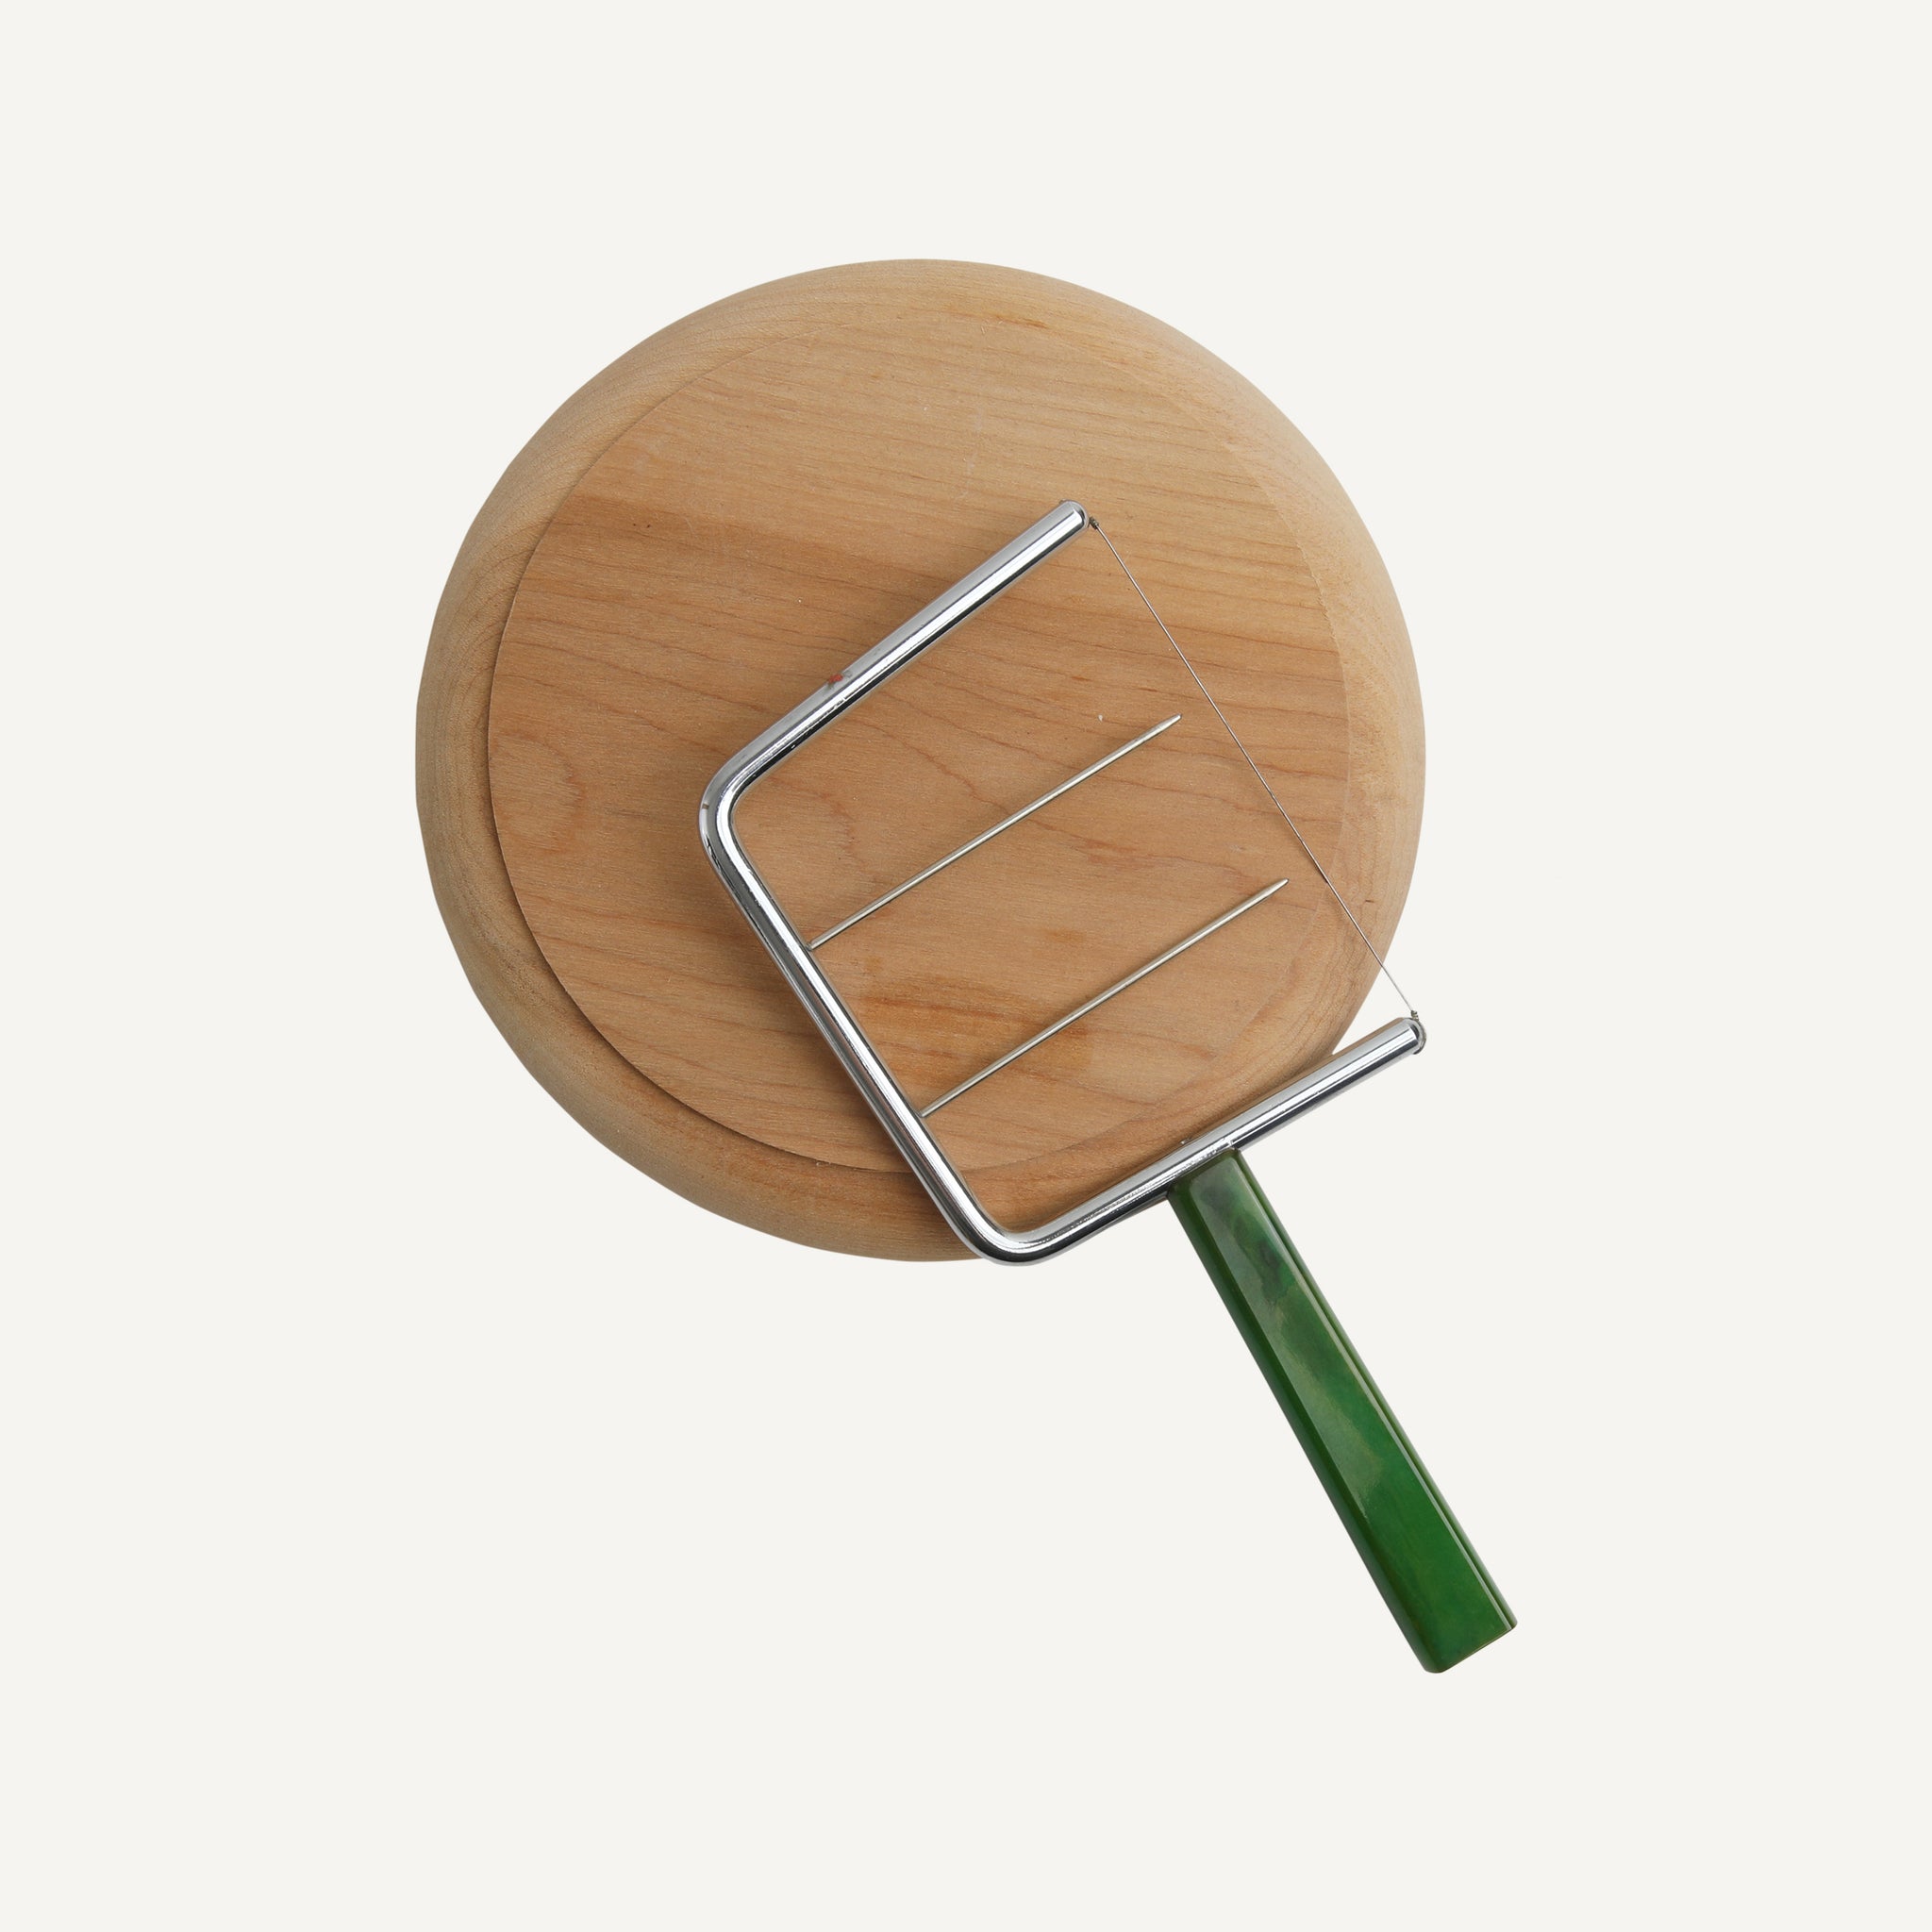 VINTAGE CHEESE BOARD WITH SLICER